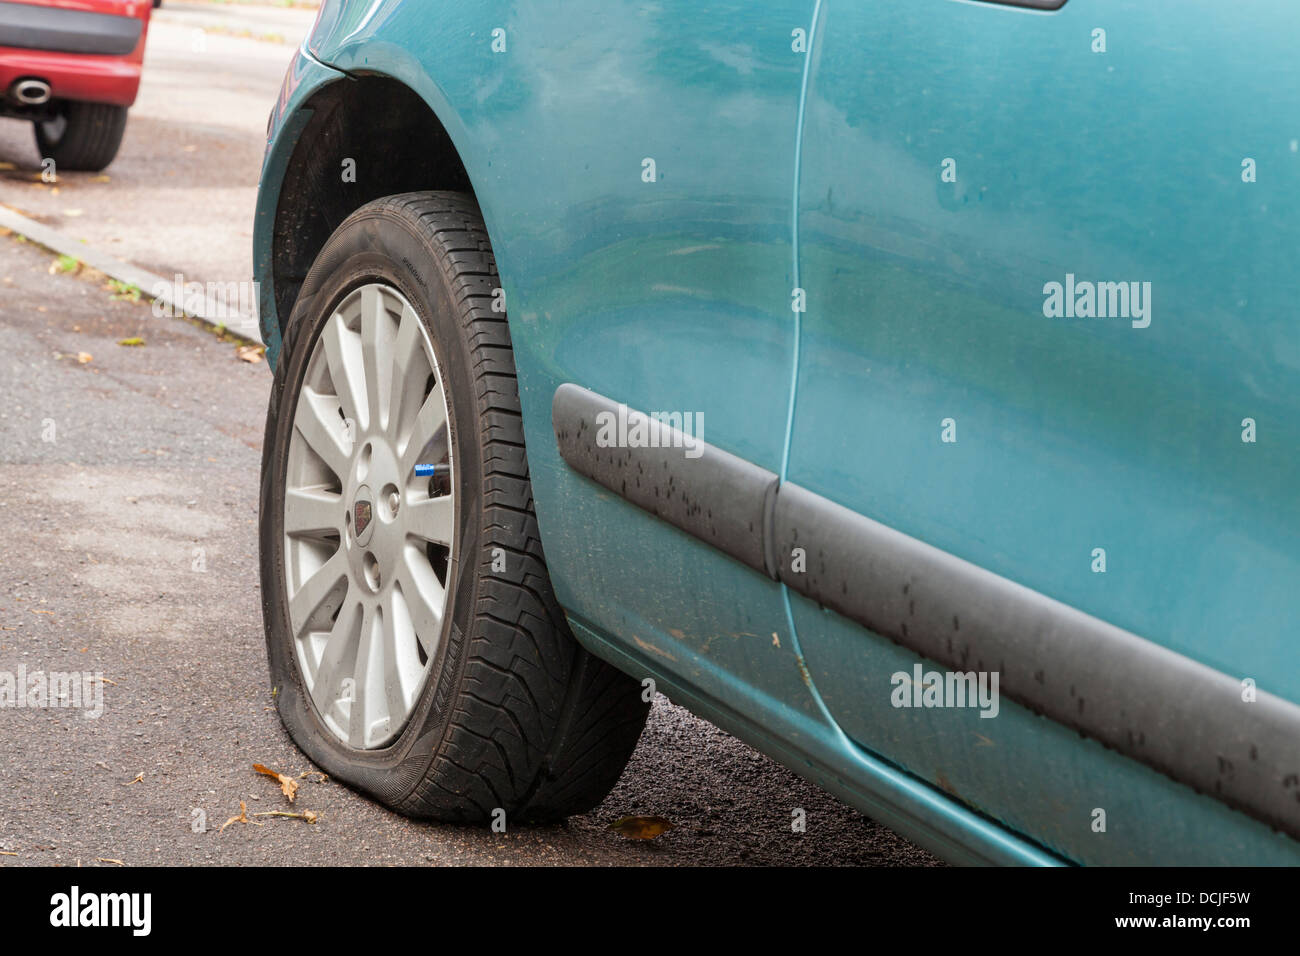 Flat tyre. Car with a punctured tyre parked up at the roadside, England, UK Stock Photo